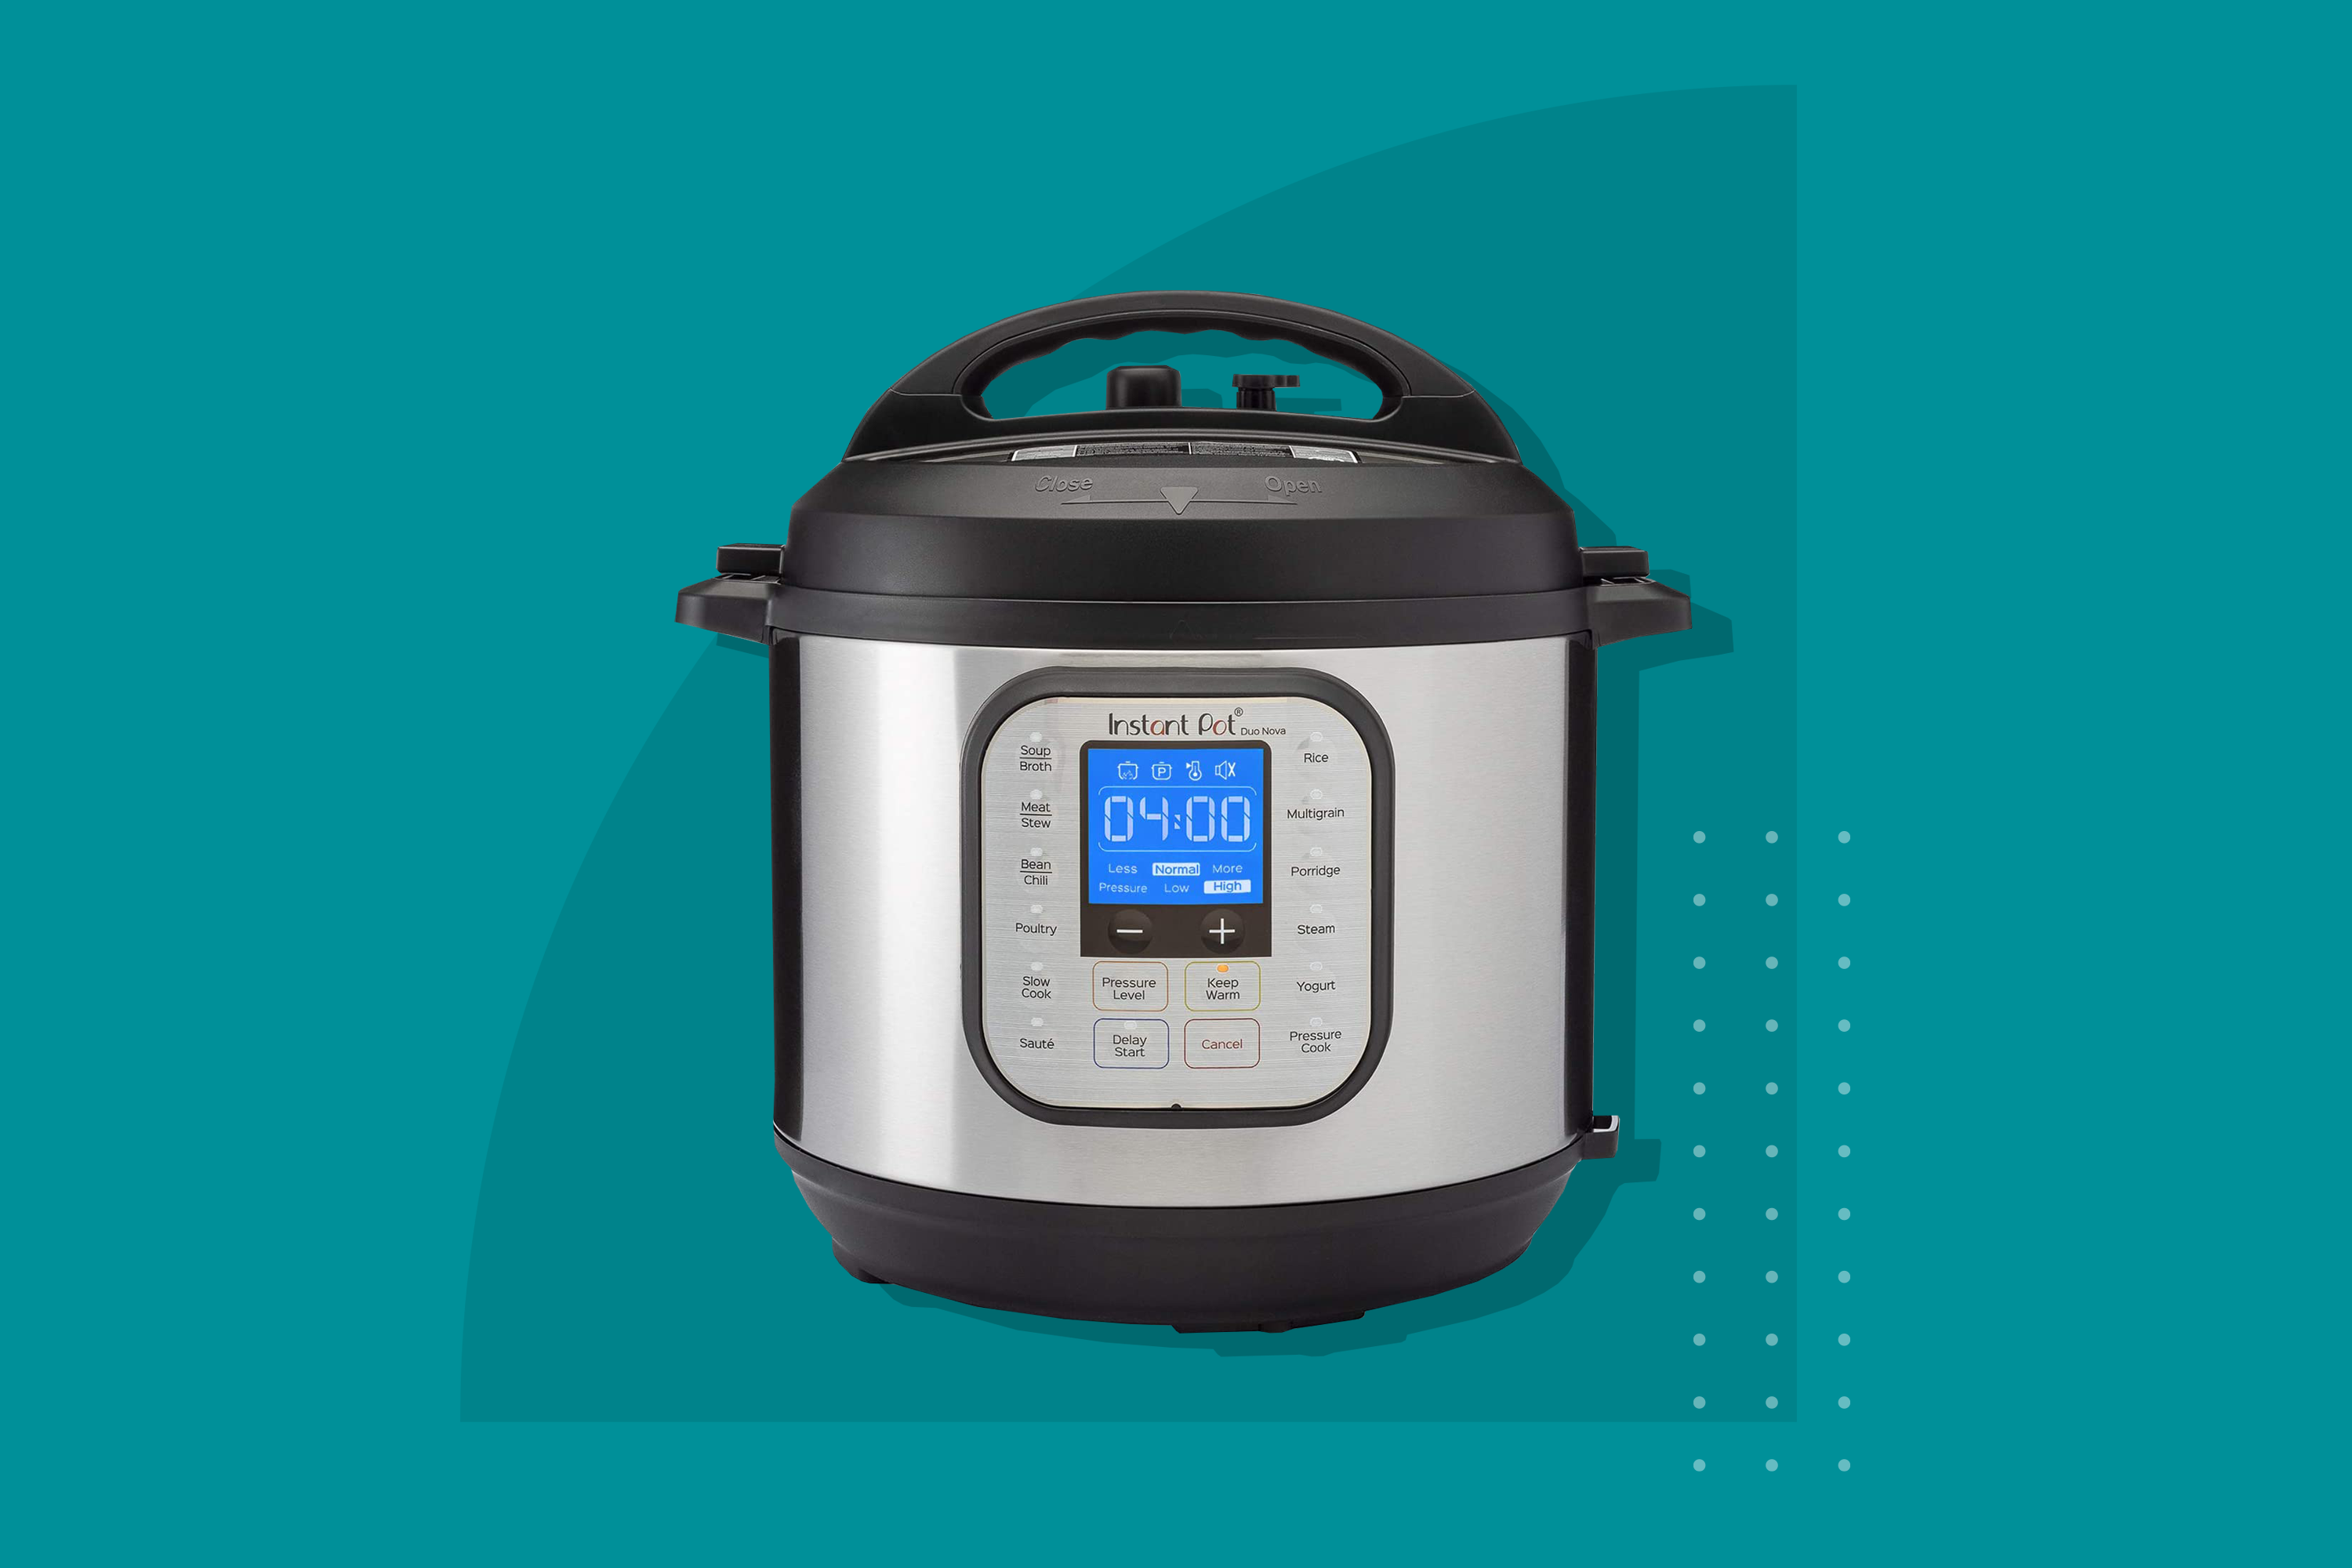 How to Use the Instant Pot Duo Nova